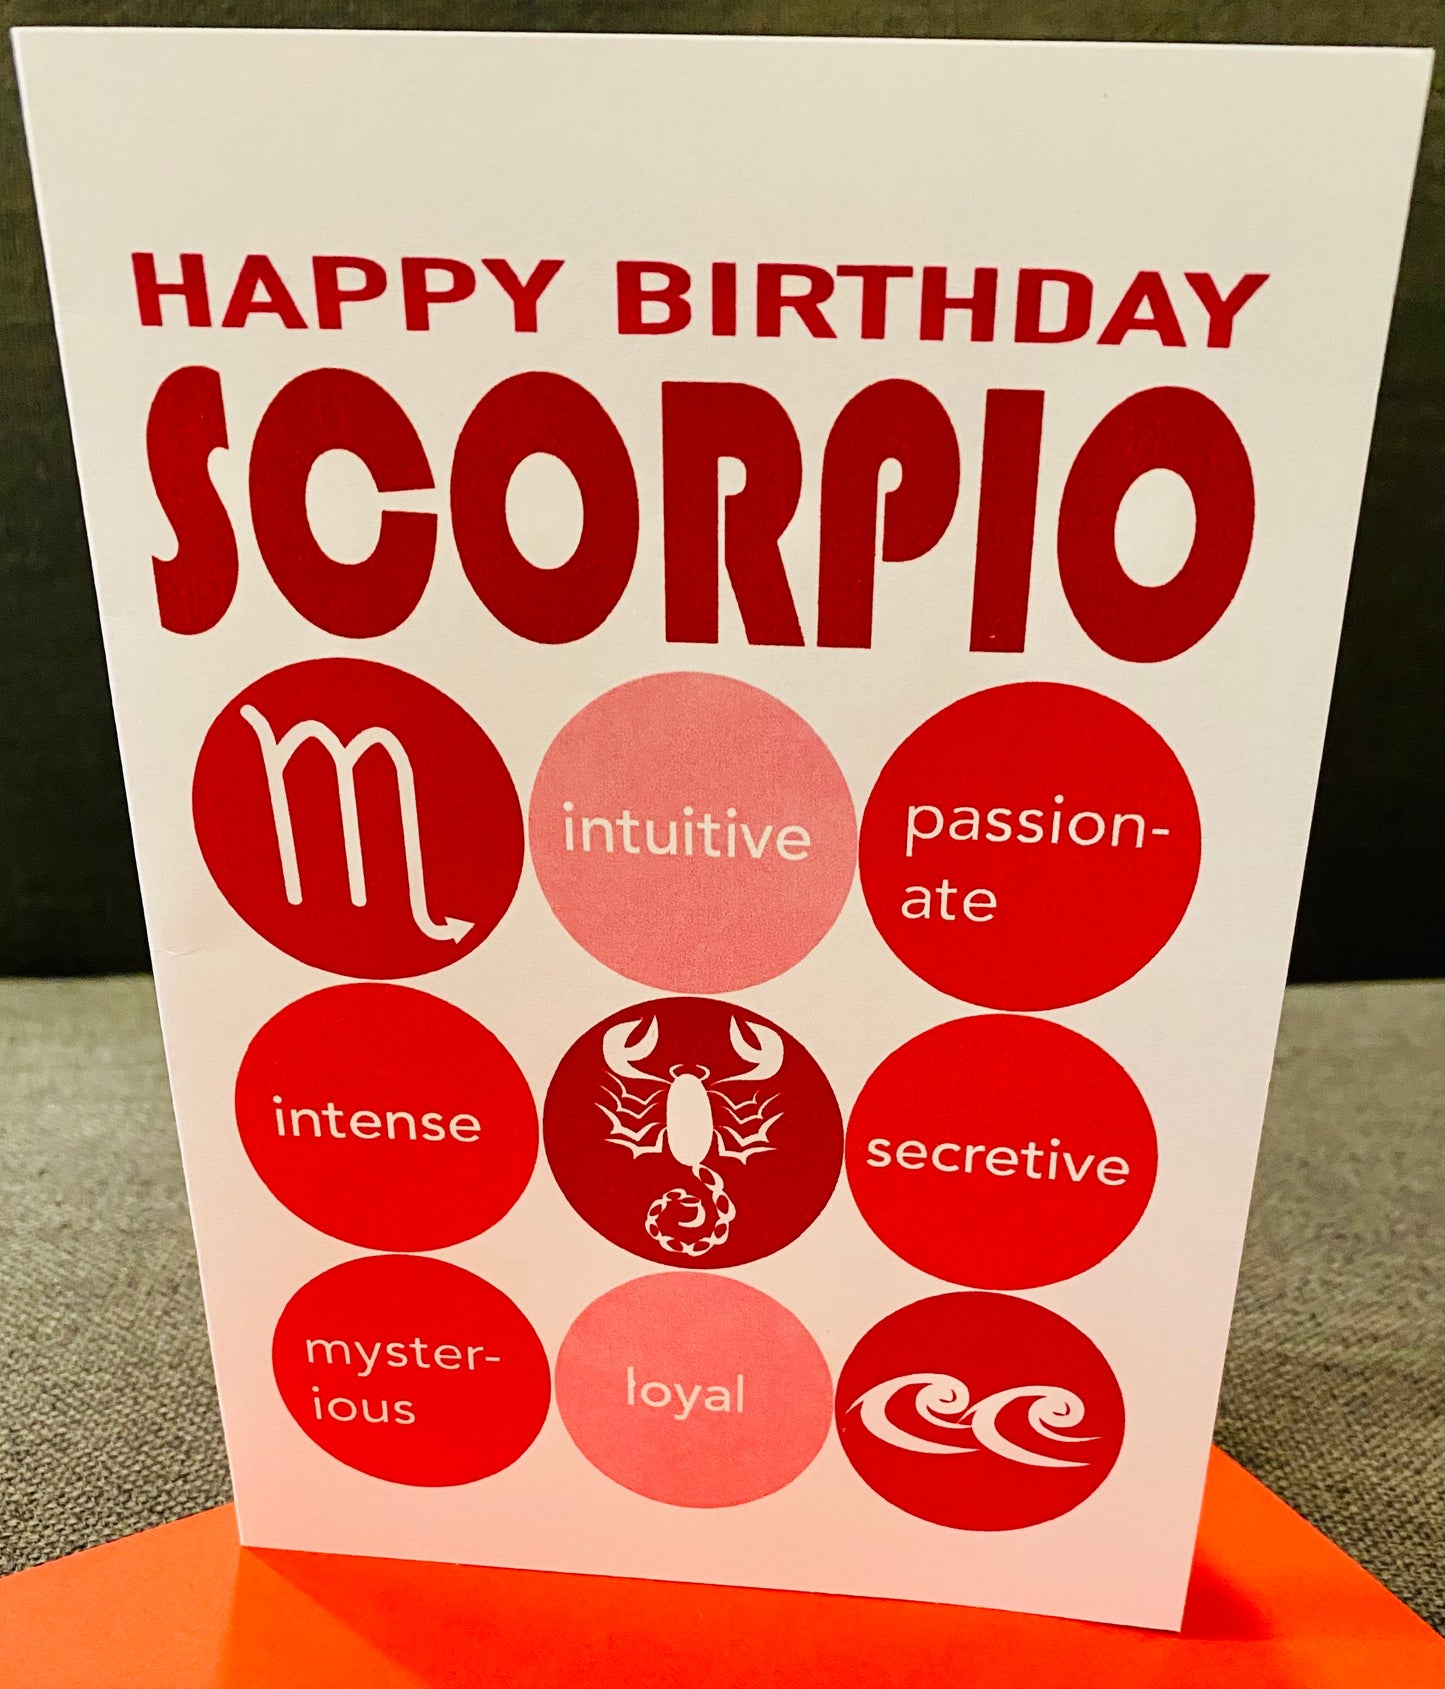 SCORPIO HAPPY BIRTHDAY Astrology Greeting Card 5x7 with sign traits